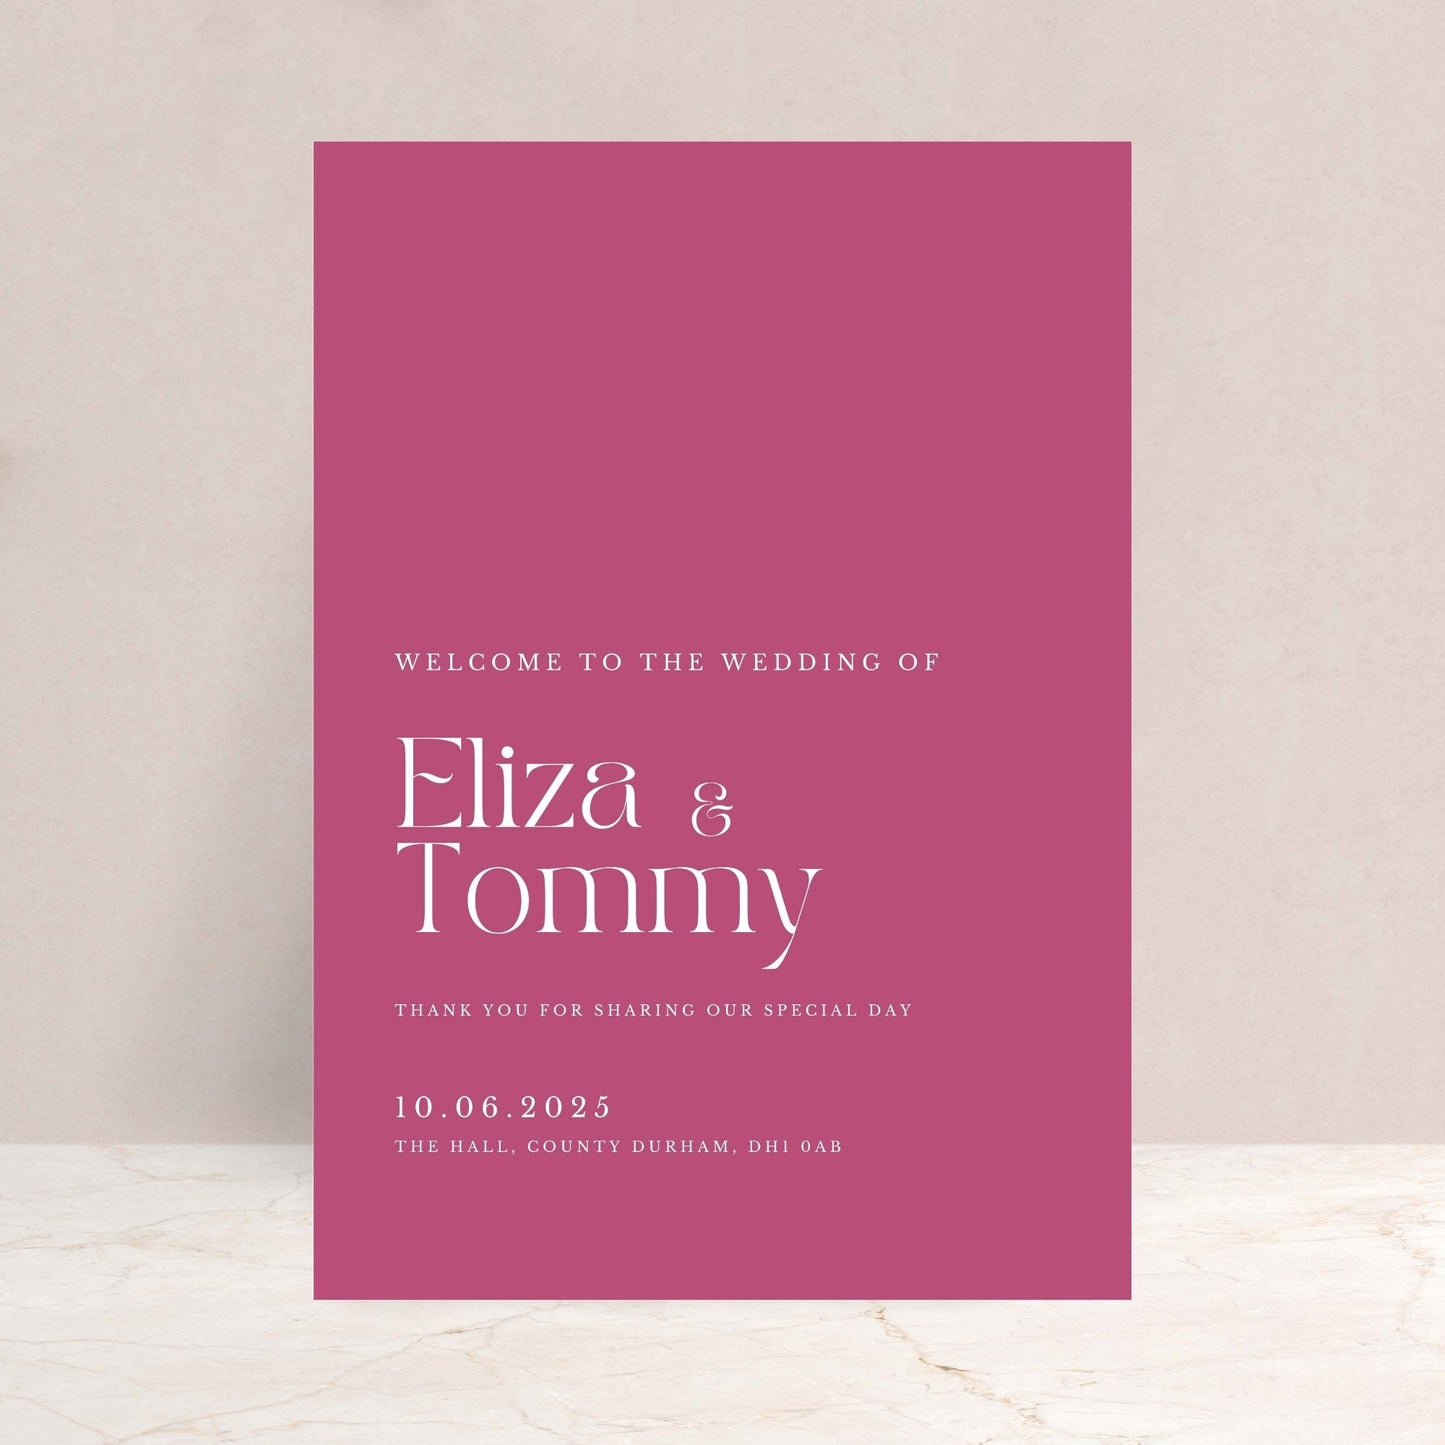 ELIZA Wedding Welcome Sign - Wedding Ceremony Stationery available at The Ivy Collection | Luxury Wedding Stationery